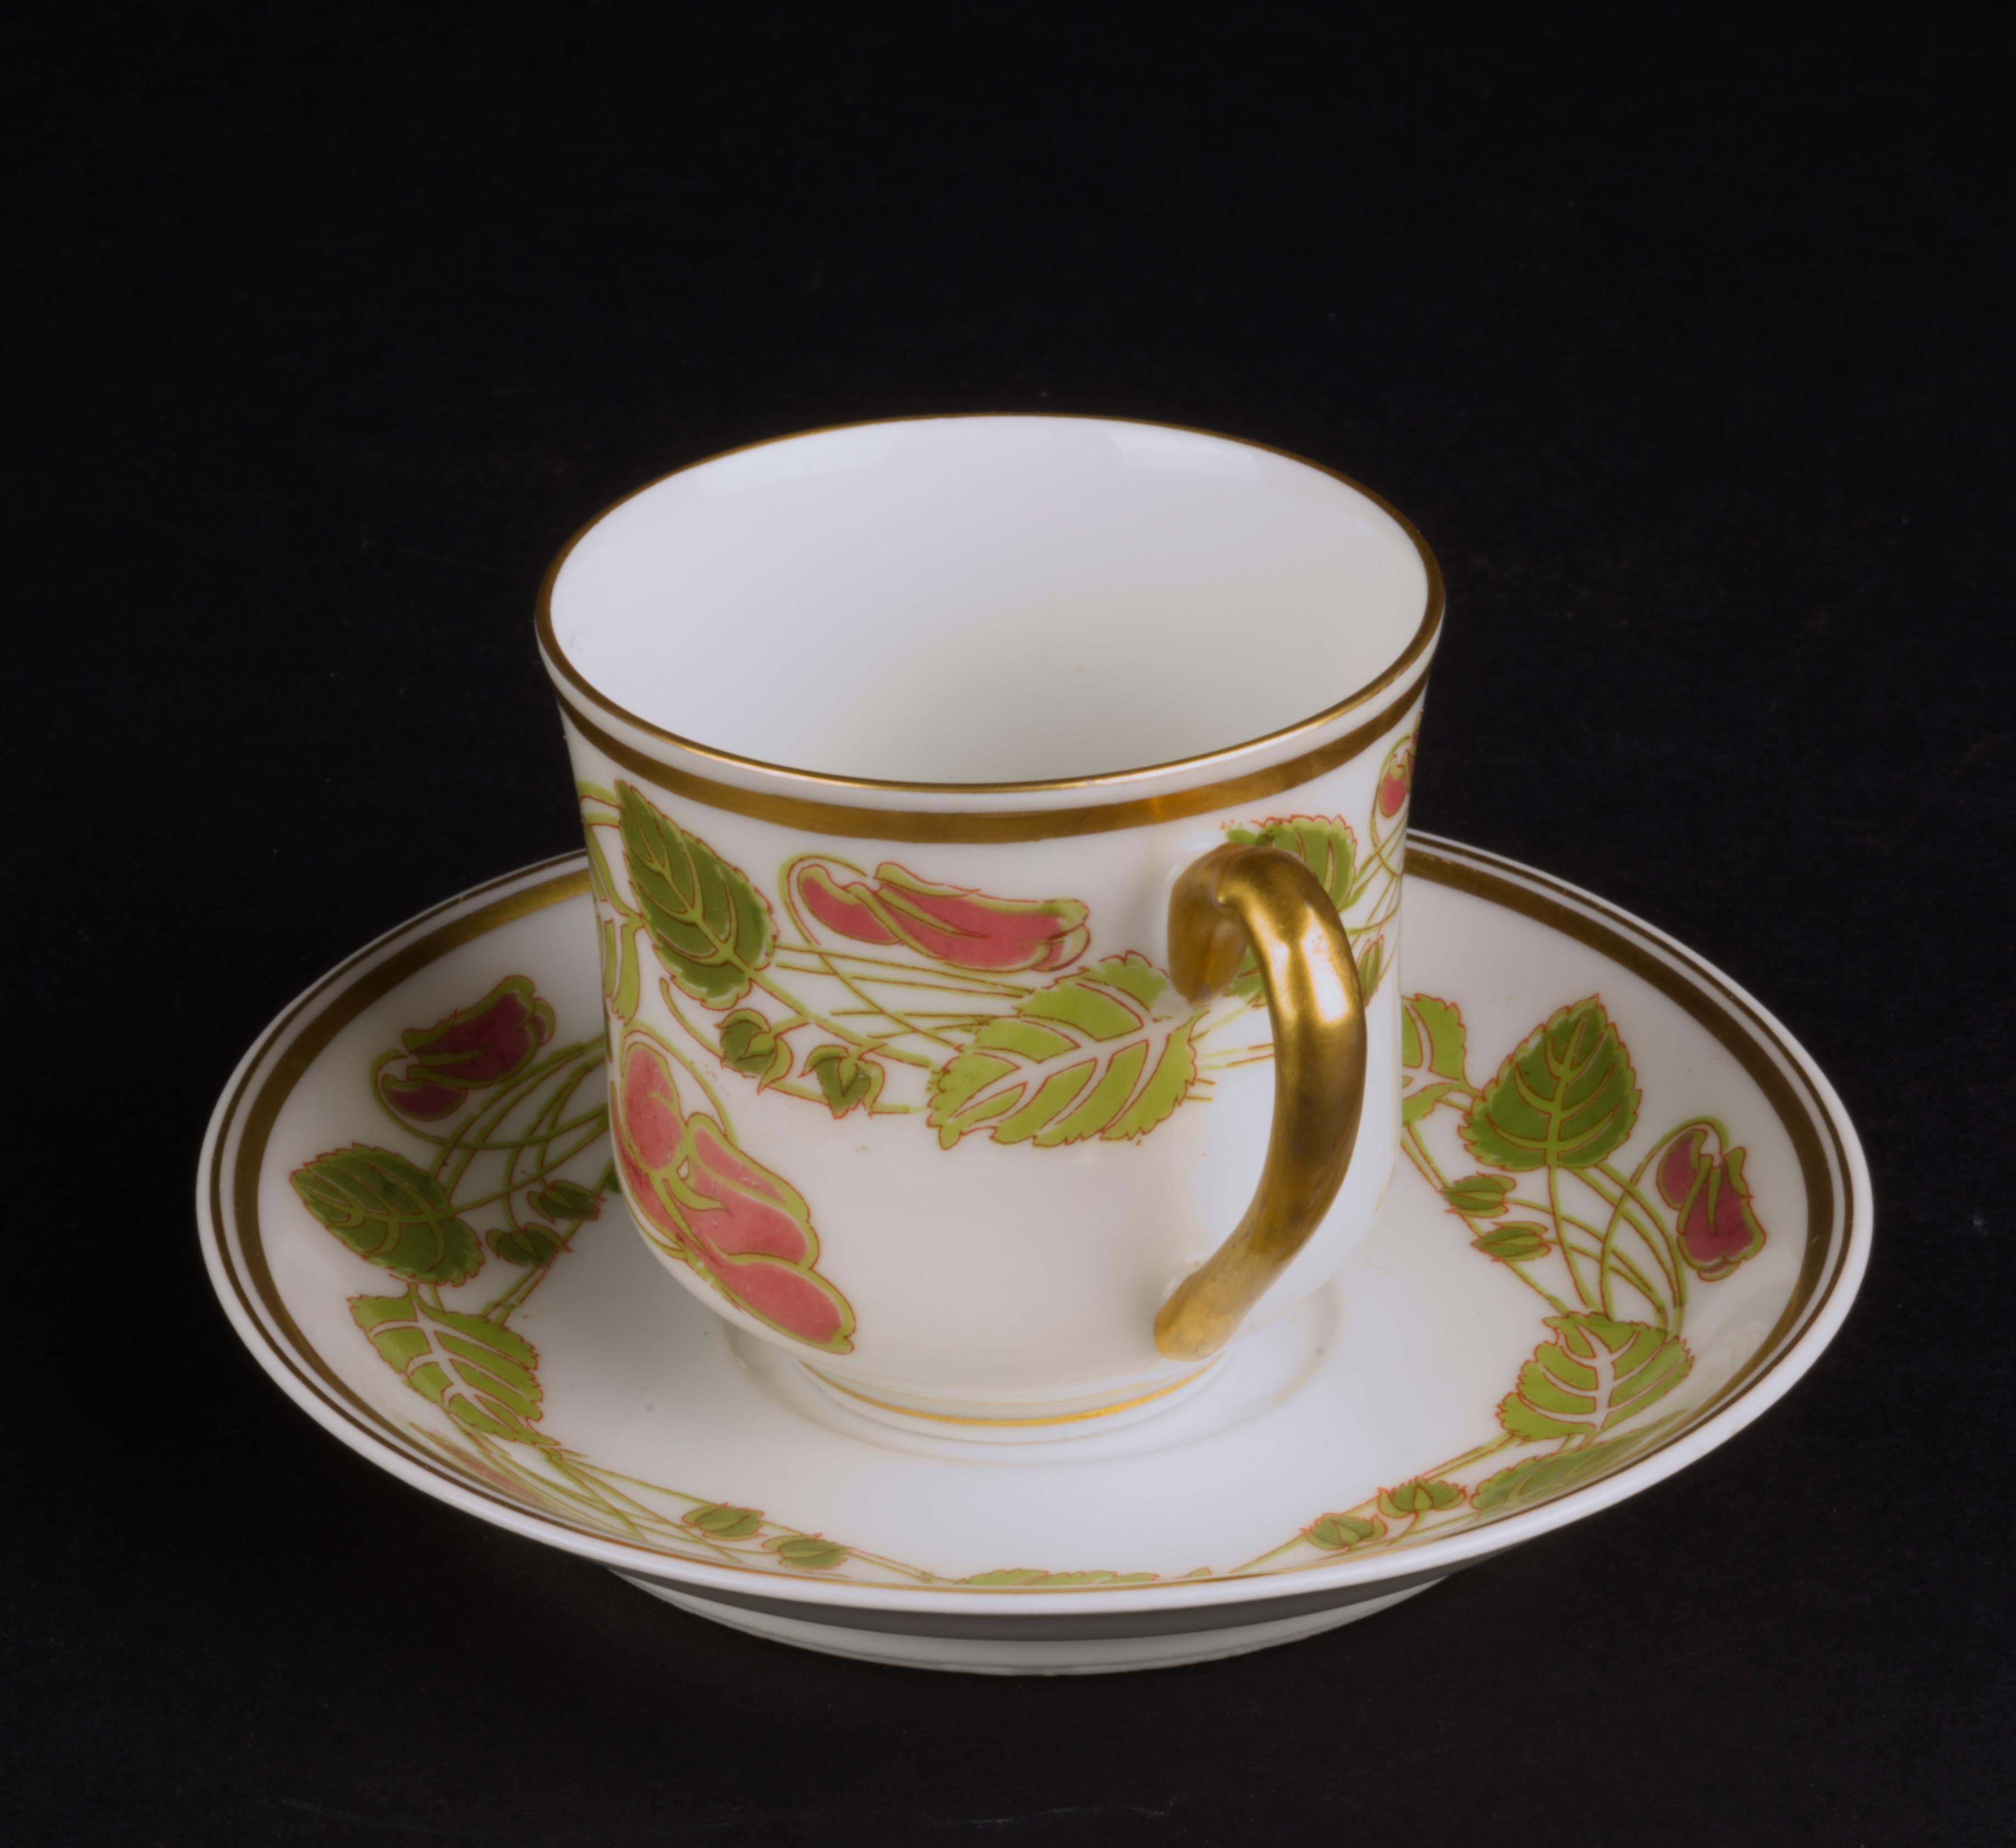 Haviland Limoges demitasse cup and saucer set was made for Wright Tindale & Van Roden, high end store in Philadelphia that specialized in selling English and Limoges porcelain in 1880-1930s. MET Museum has two of the store's catalogues in its